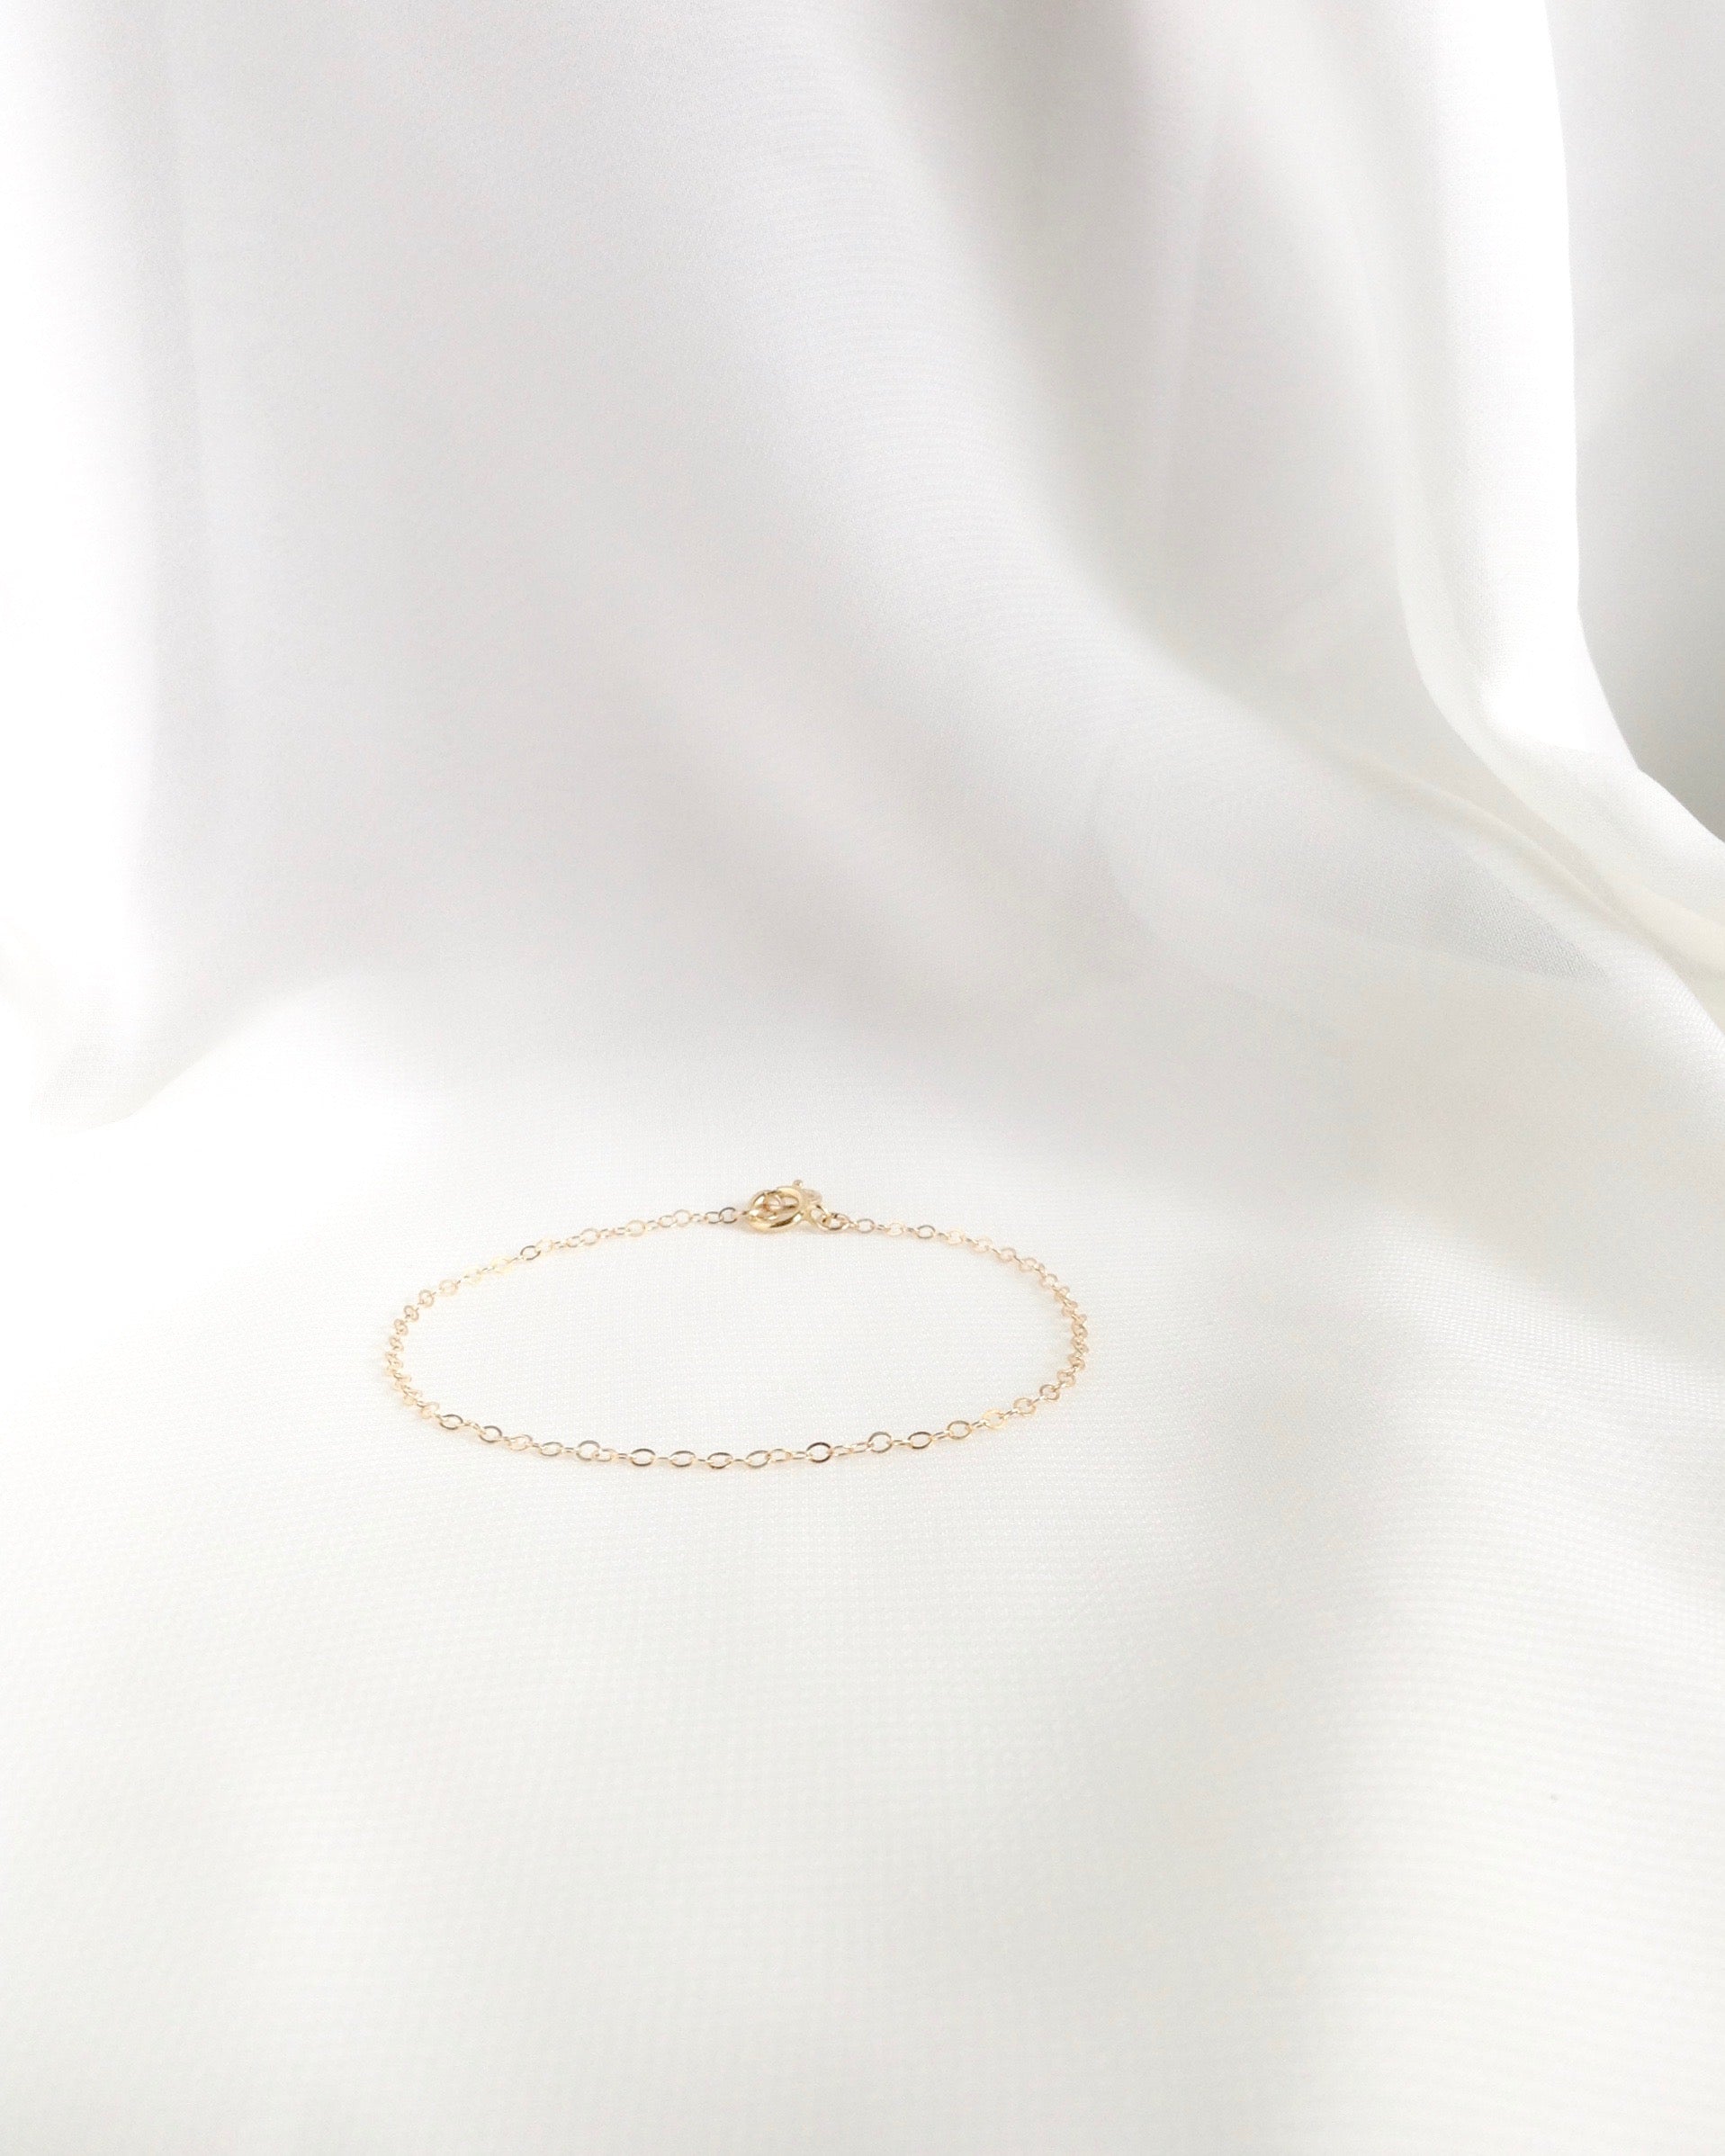 Simple Dainty Bracelet in Gold Filled or Sterling Silver | IB Jewelry